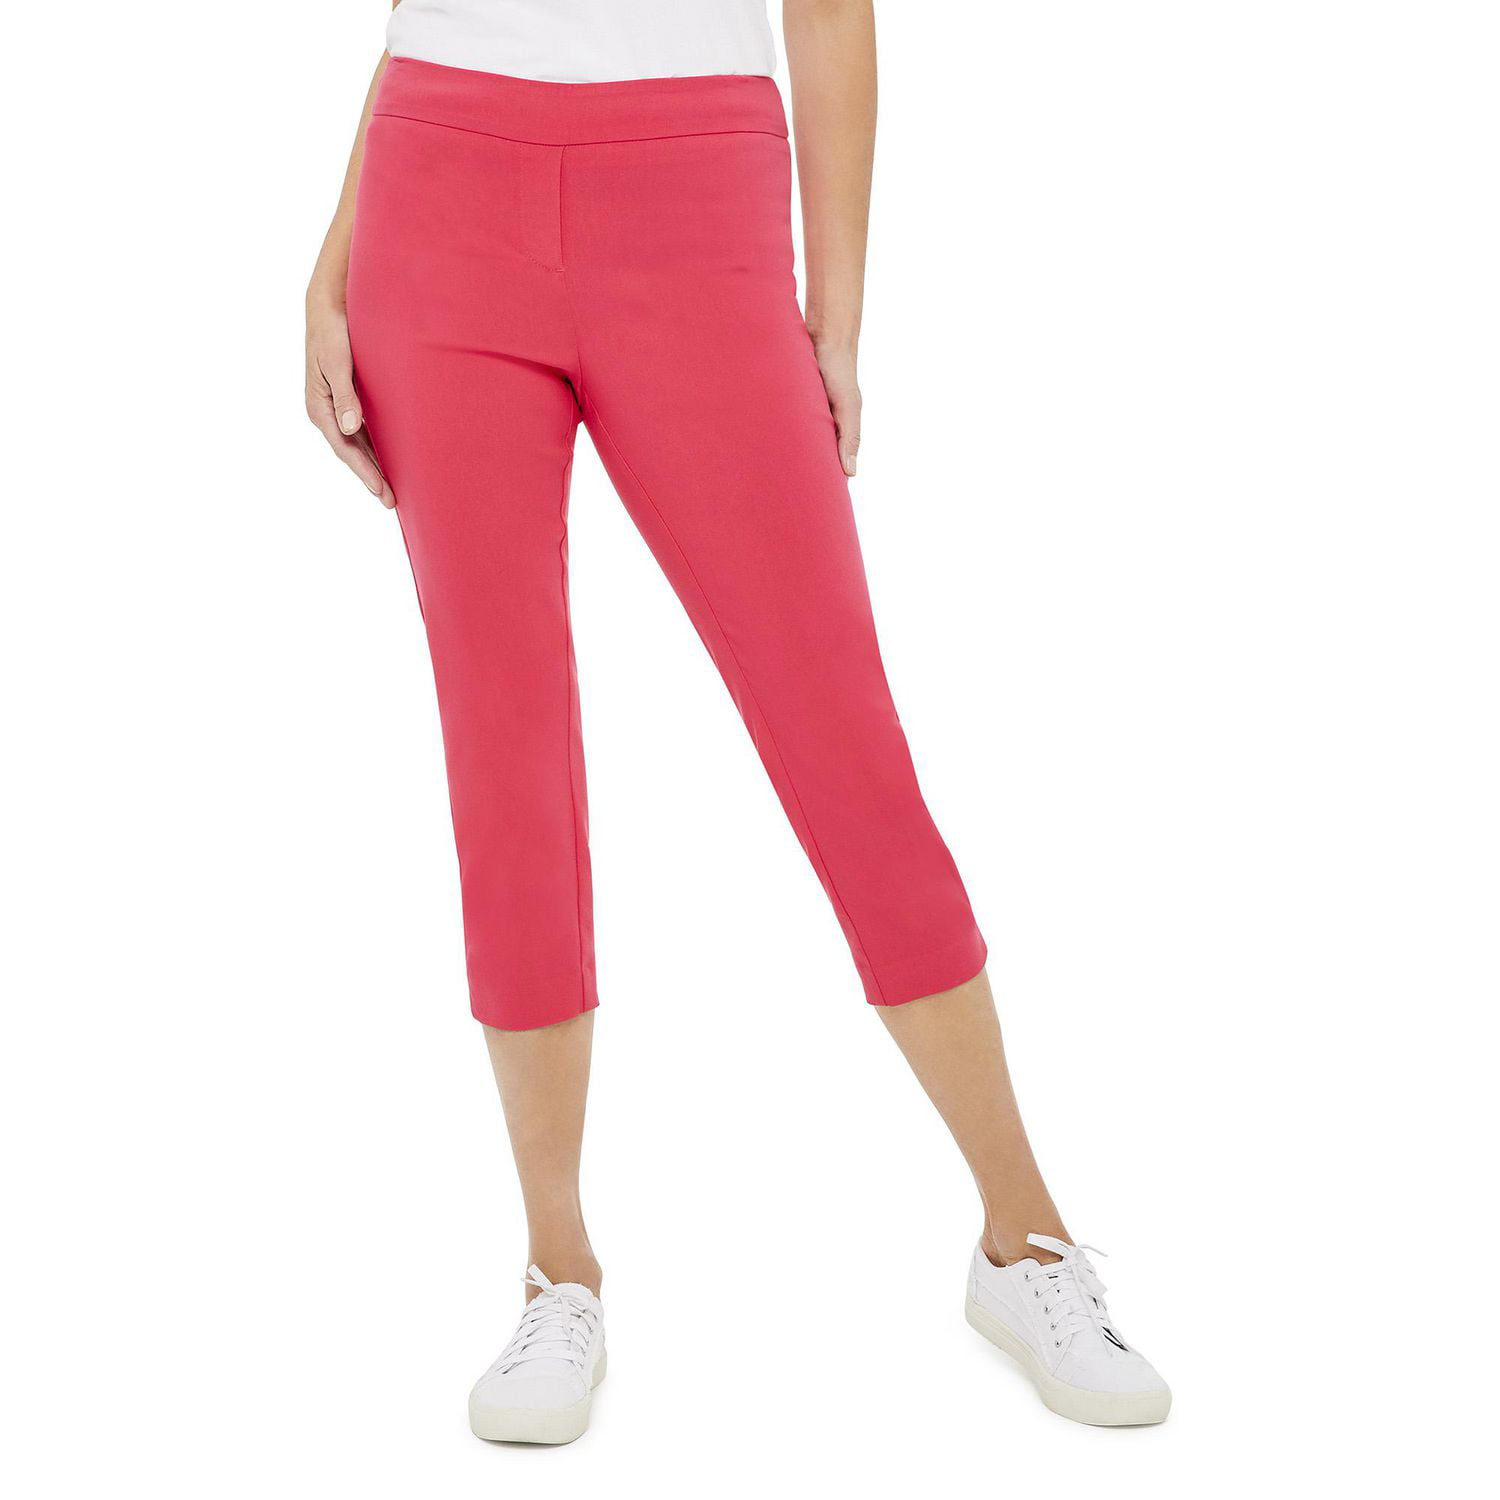 Latest Girls Capri Pants Collections For Summer - A Beauty Hub